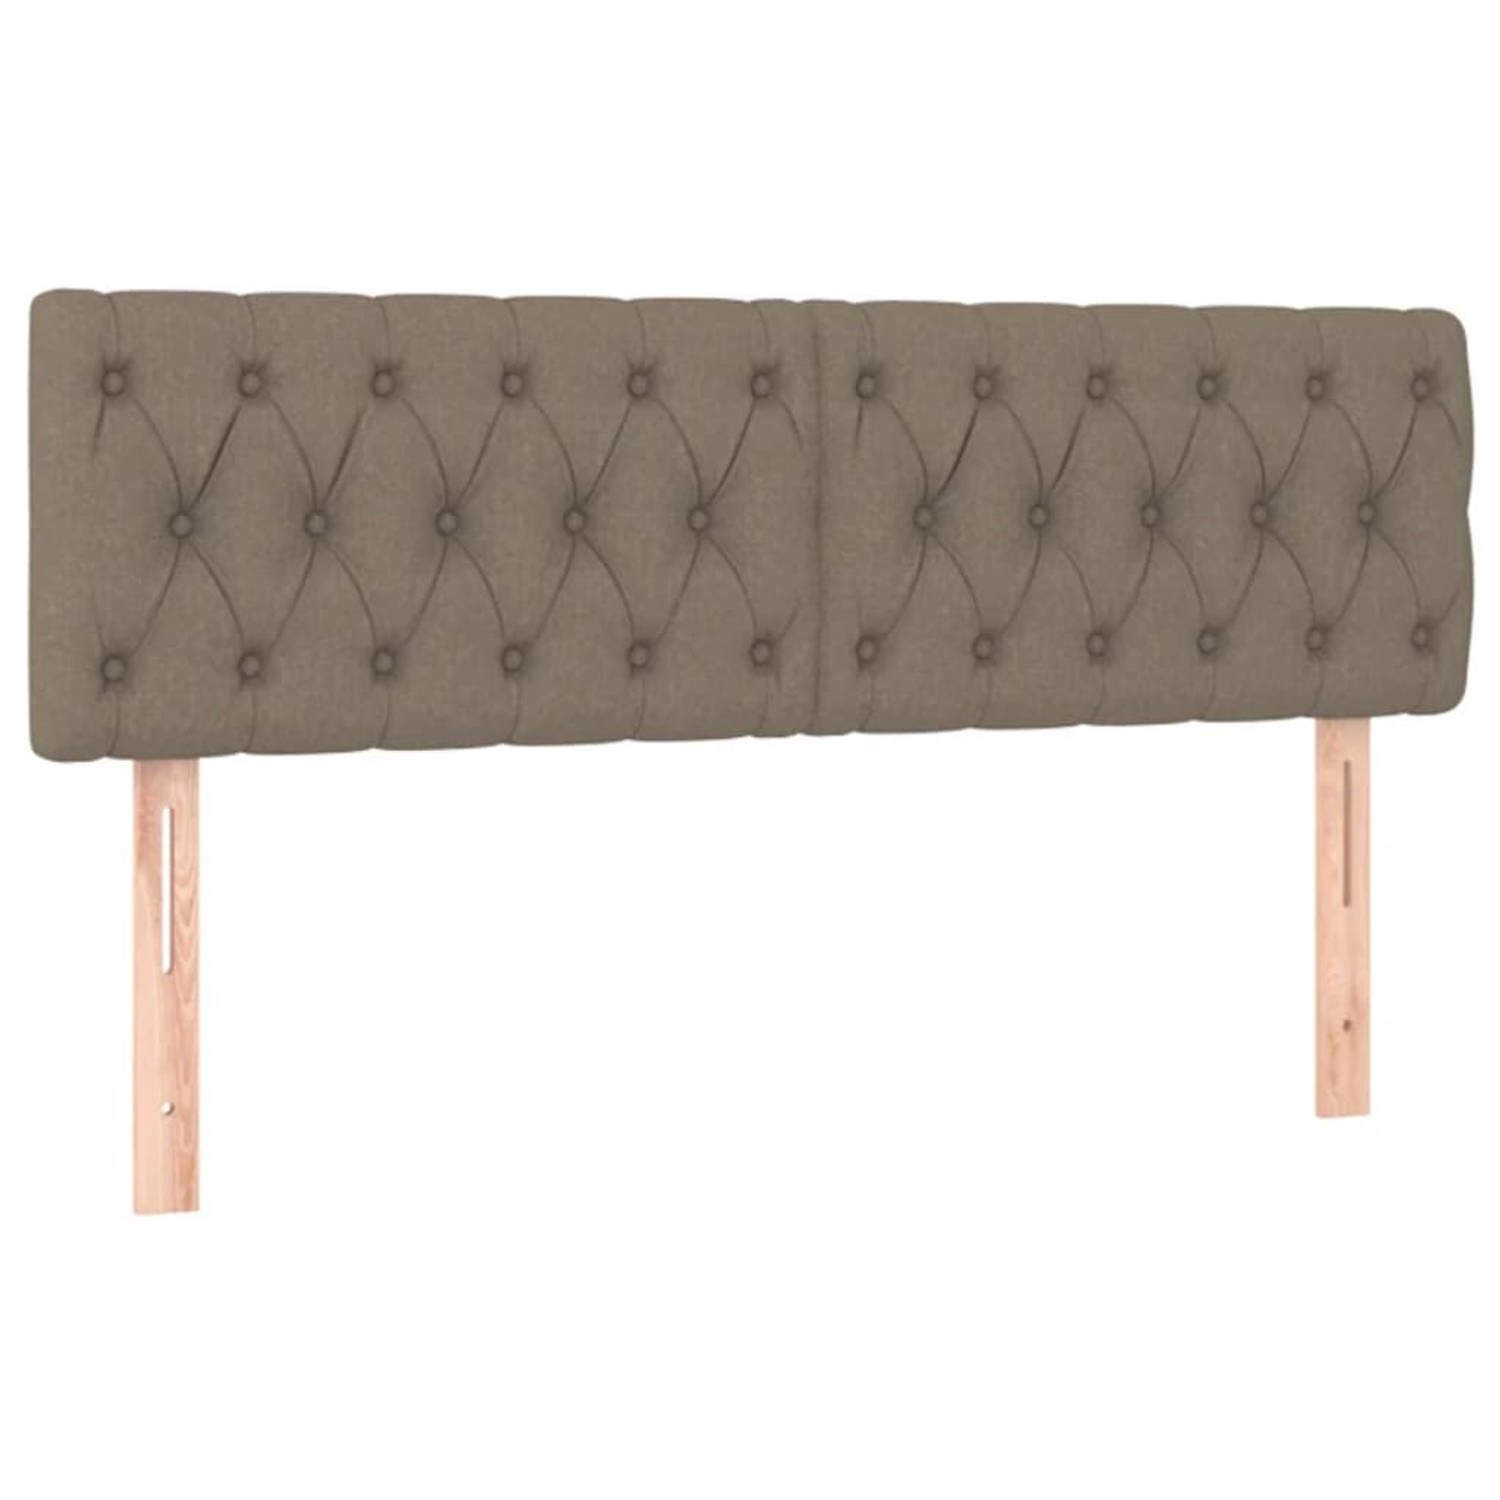 The Living Store Hoofdbord - Bed Accessoires - Size 144 x 7 x 78/88 cm - Duurzame stof - Houten poten - Verstelbare hoogte - Taupe